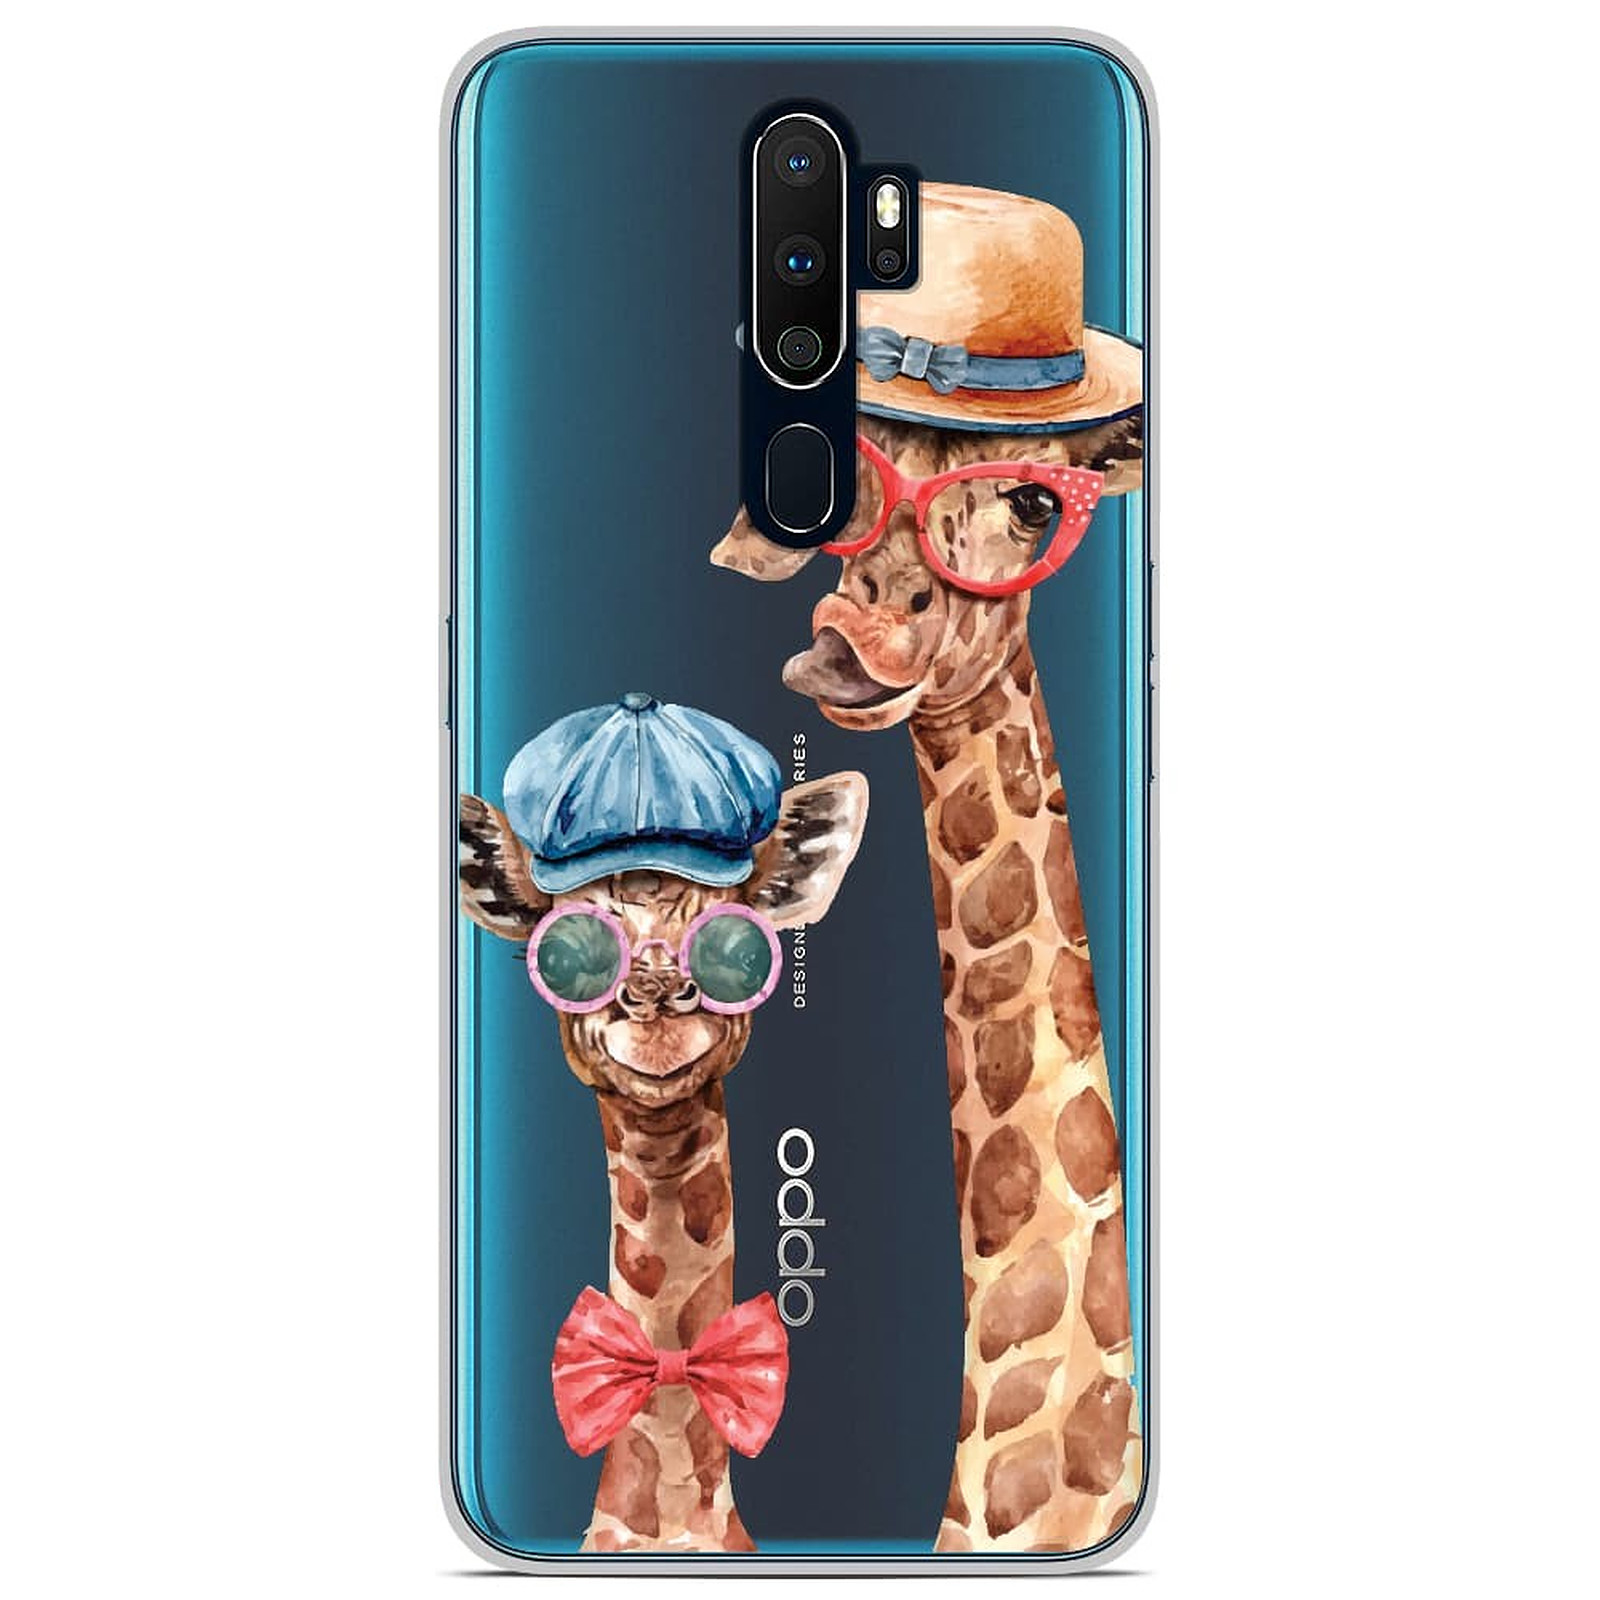 1001 Coques Coque silicone gel Oppo A9 2020 motif Funny Girafe - Coque telephone 1001Coques